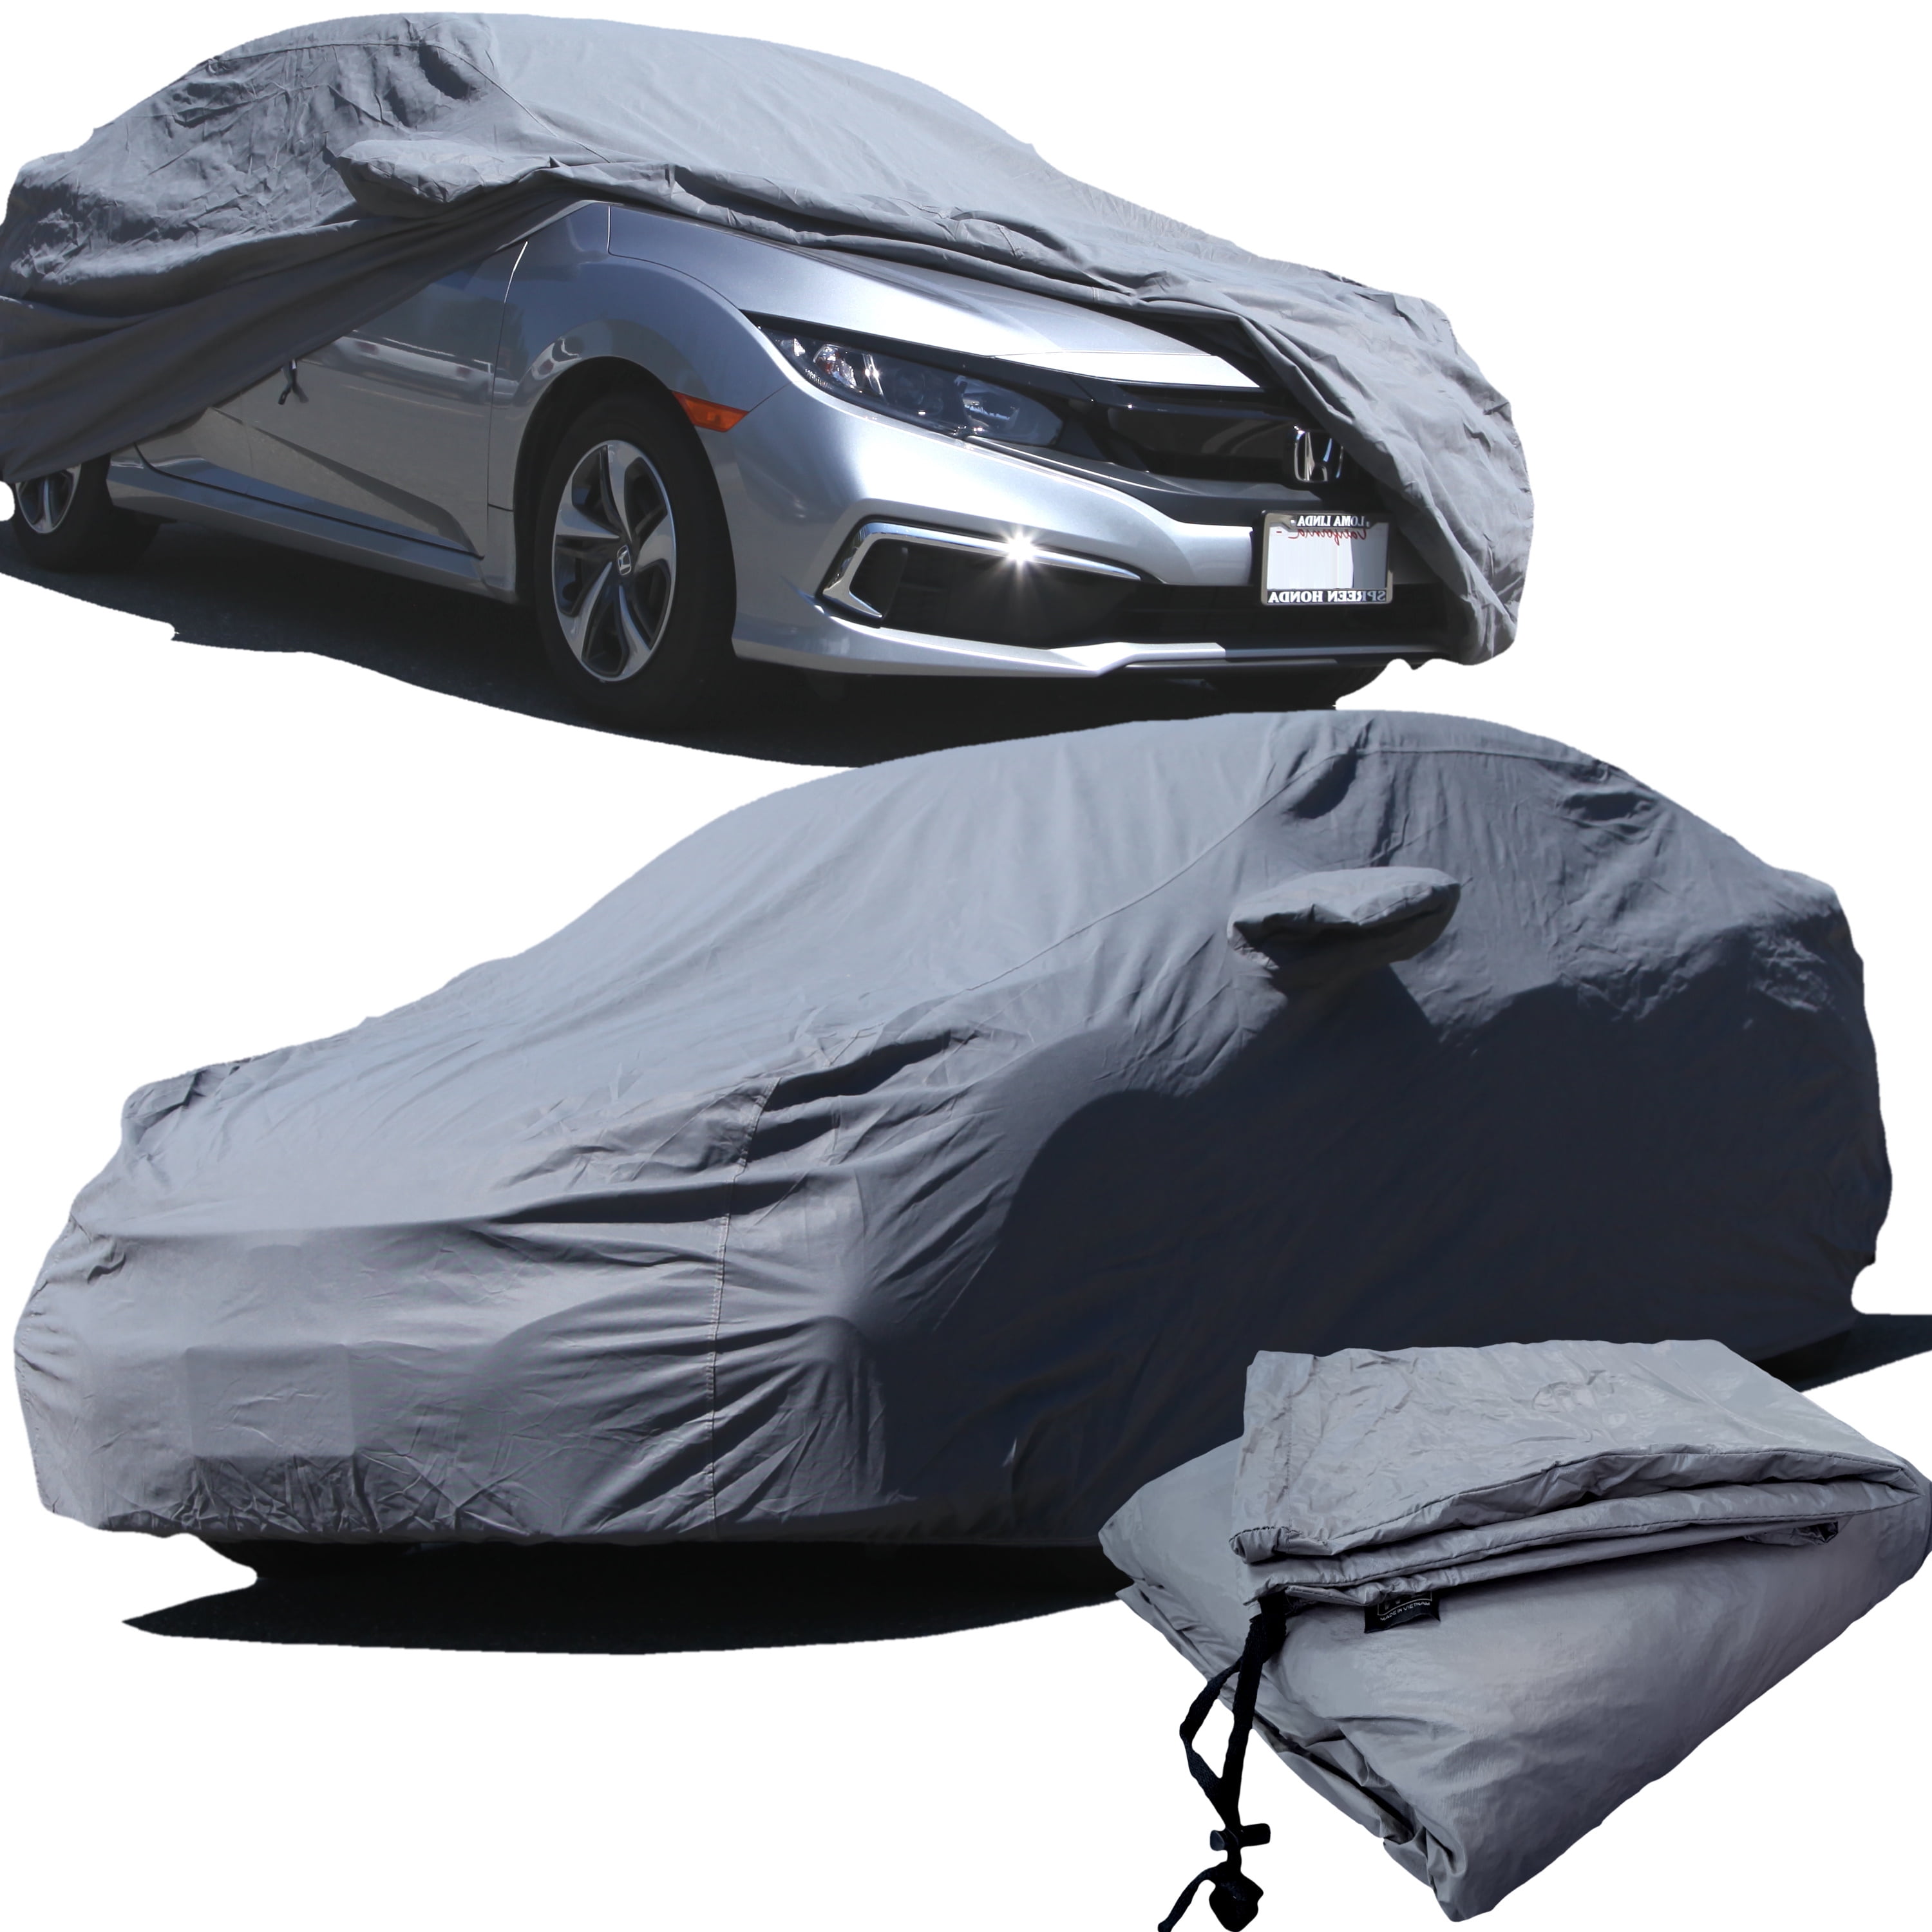 2014 Ford Focus Hatchback Breathable Car Cover w/ Mirror Pocket 